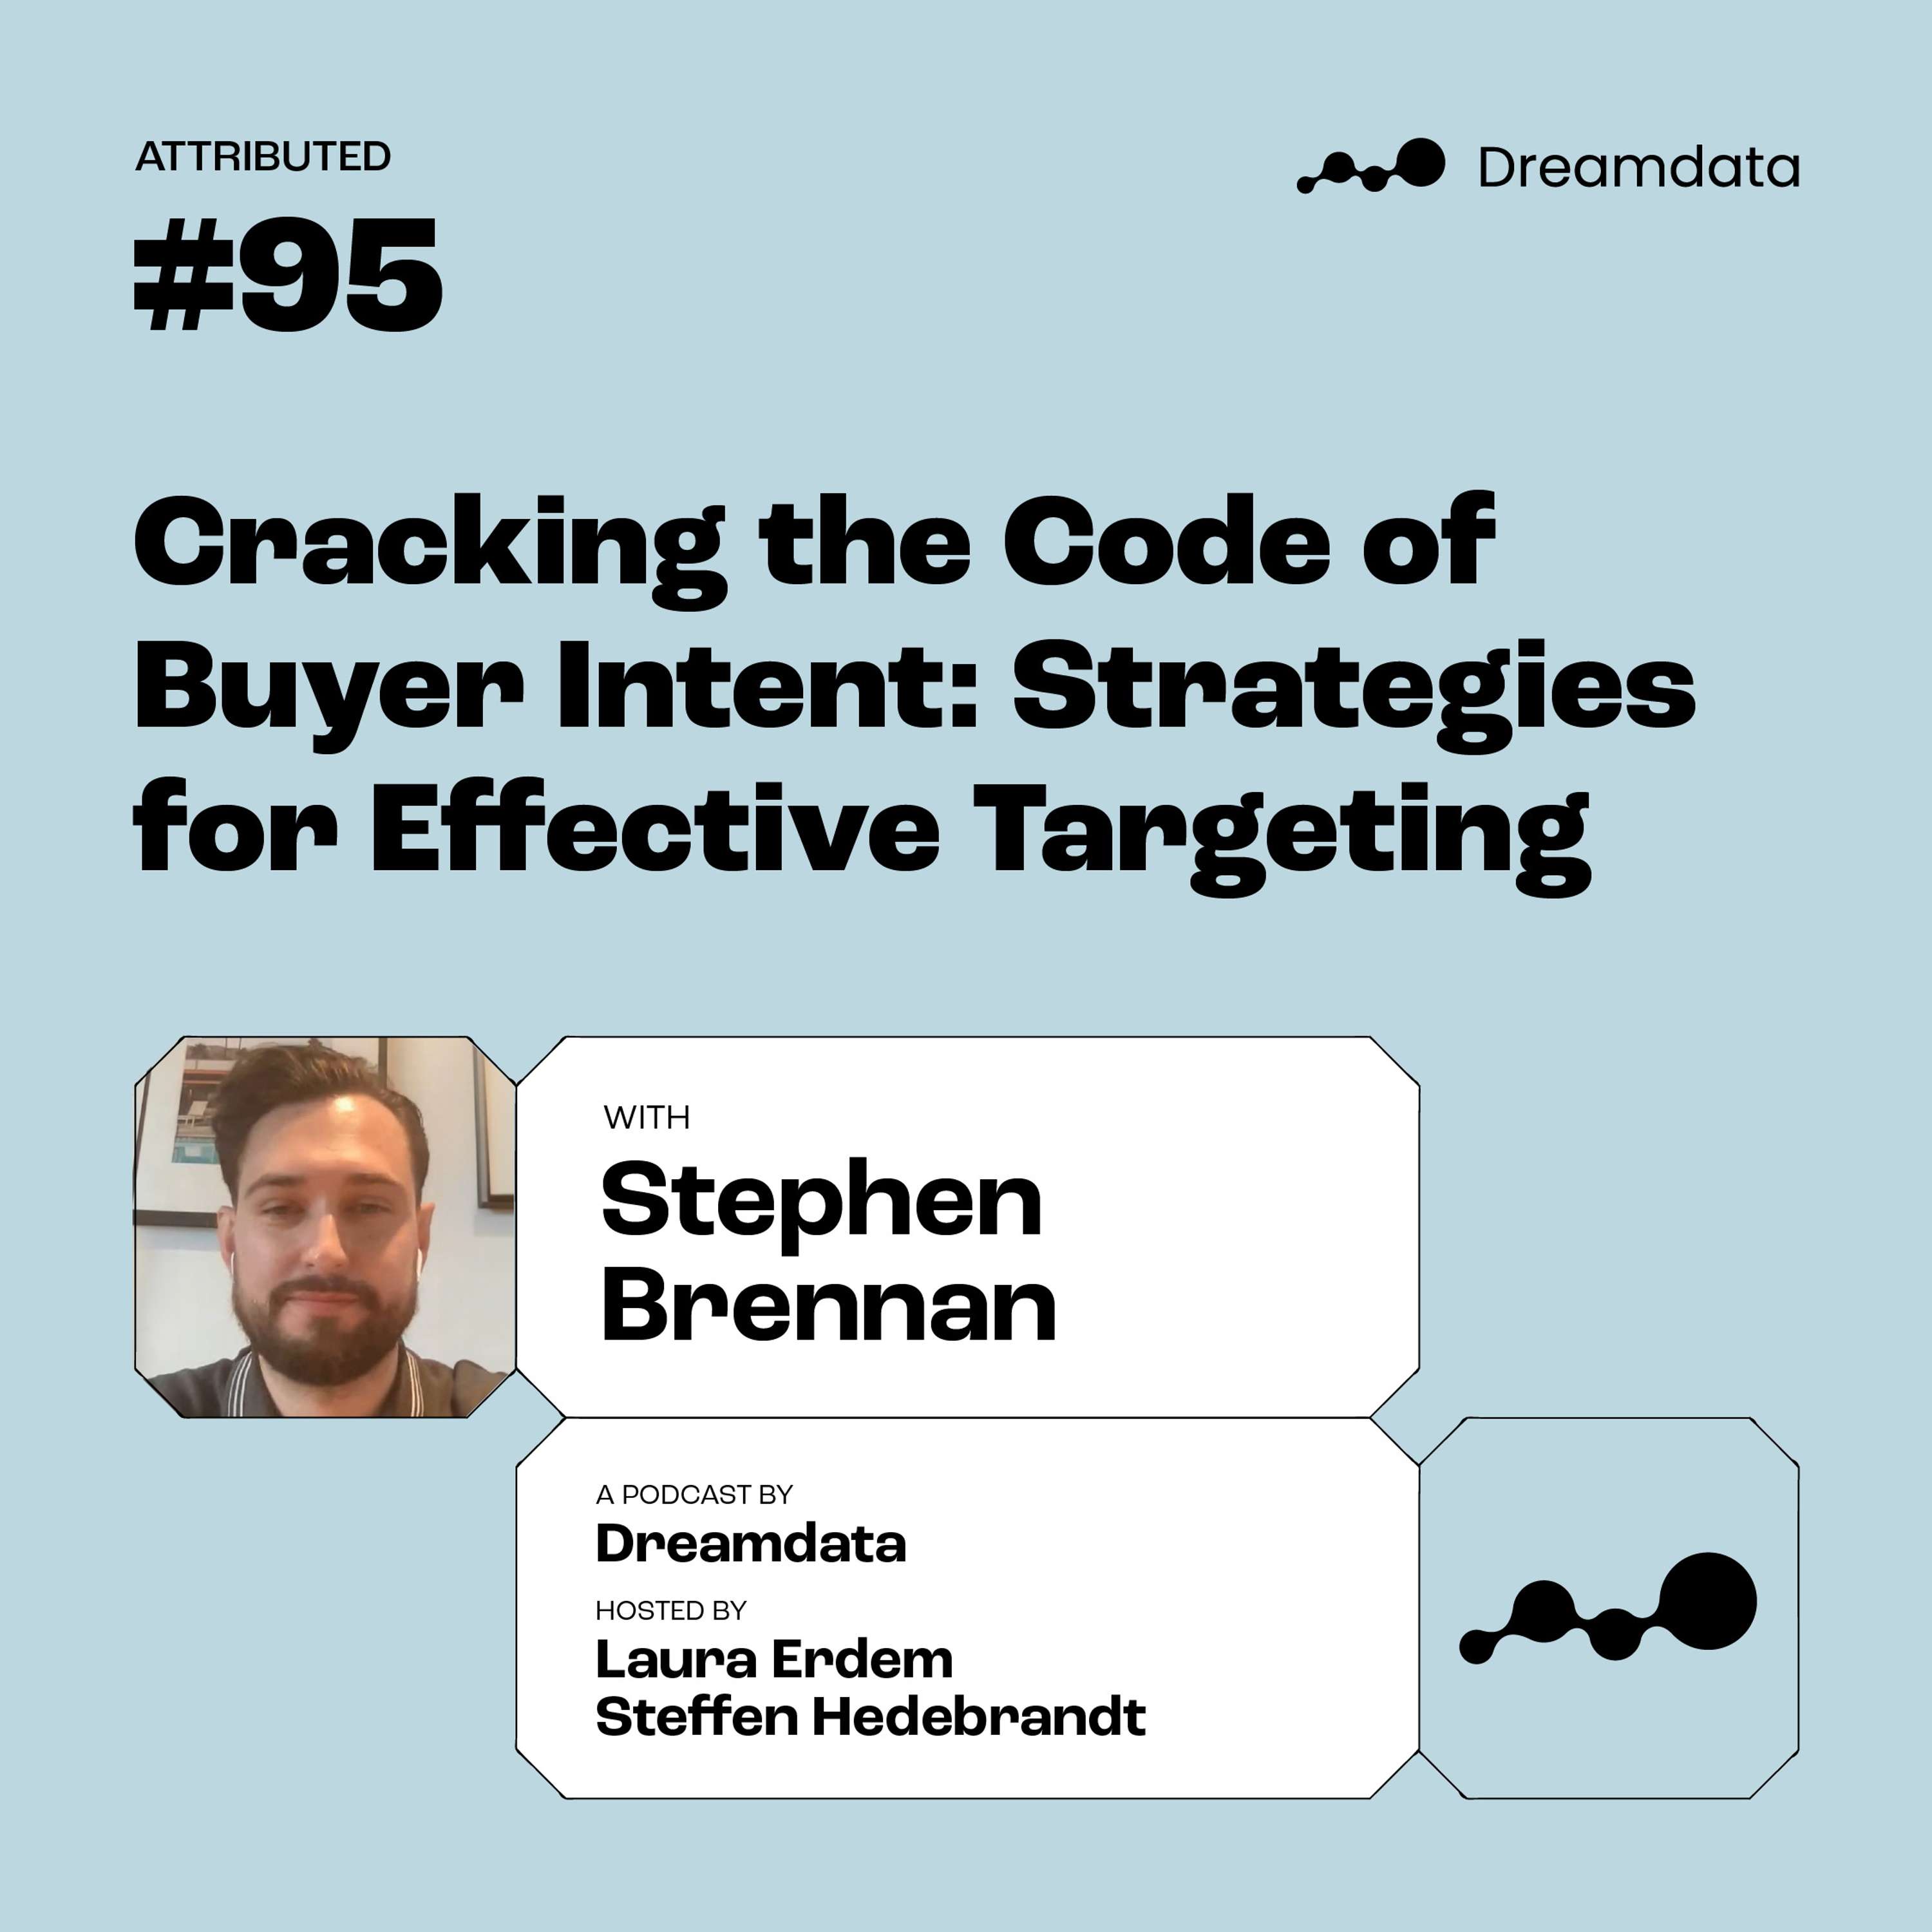 Stephen Brennan: Cracking the Code of Buyer Intent: Strategies for Effective Targeting